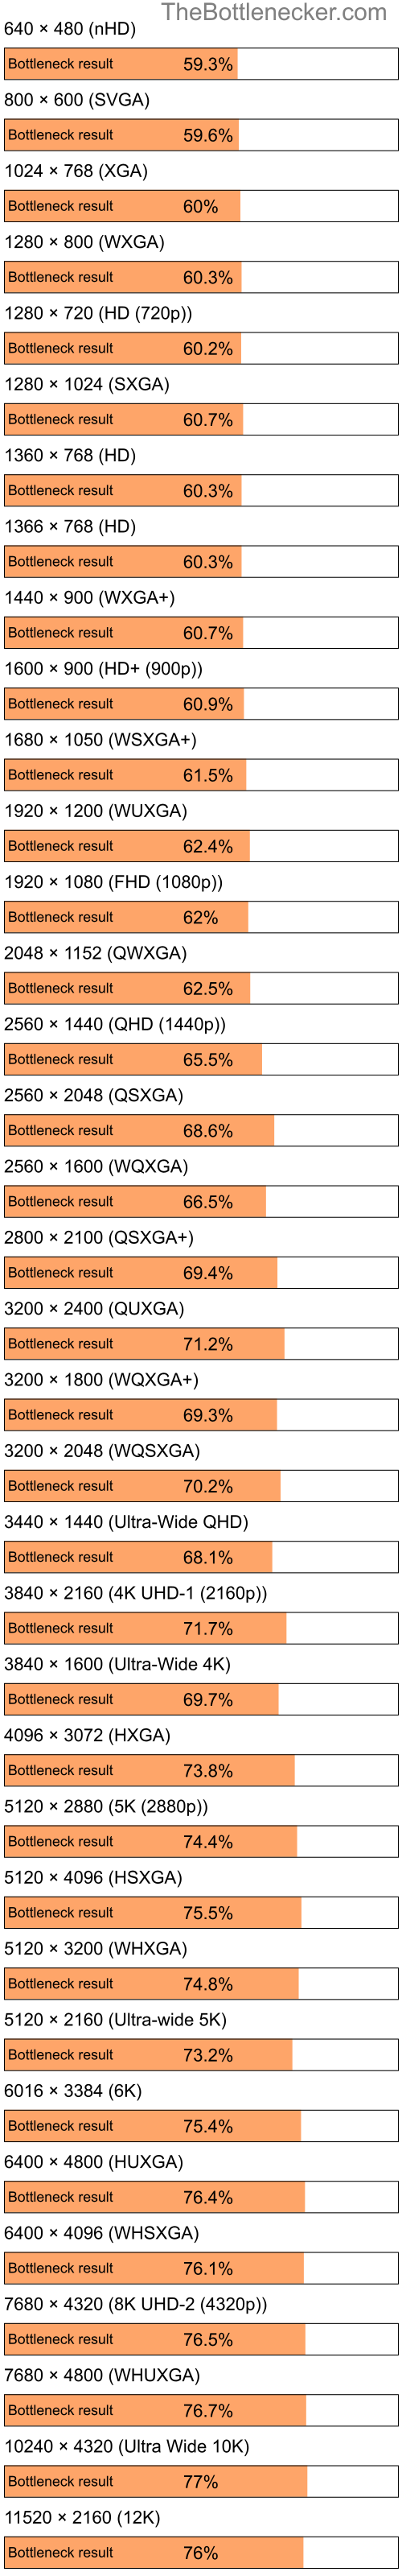 Bottleneck results by resolution for Intel Pentium 4 and AMD Radeon X800 GTO in General Tasks